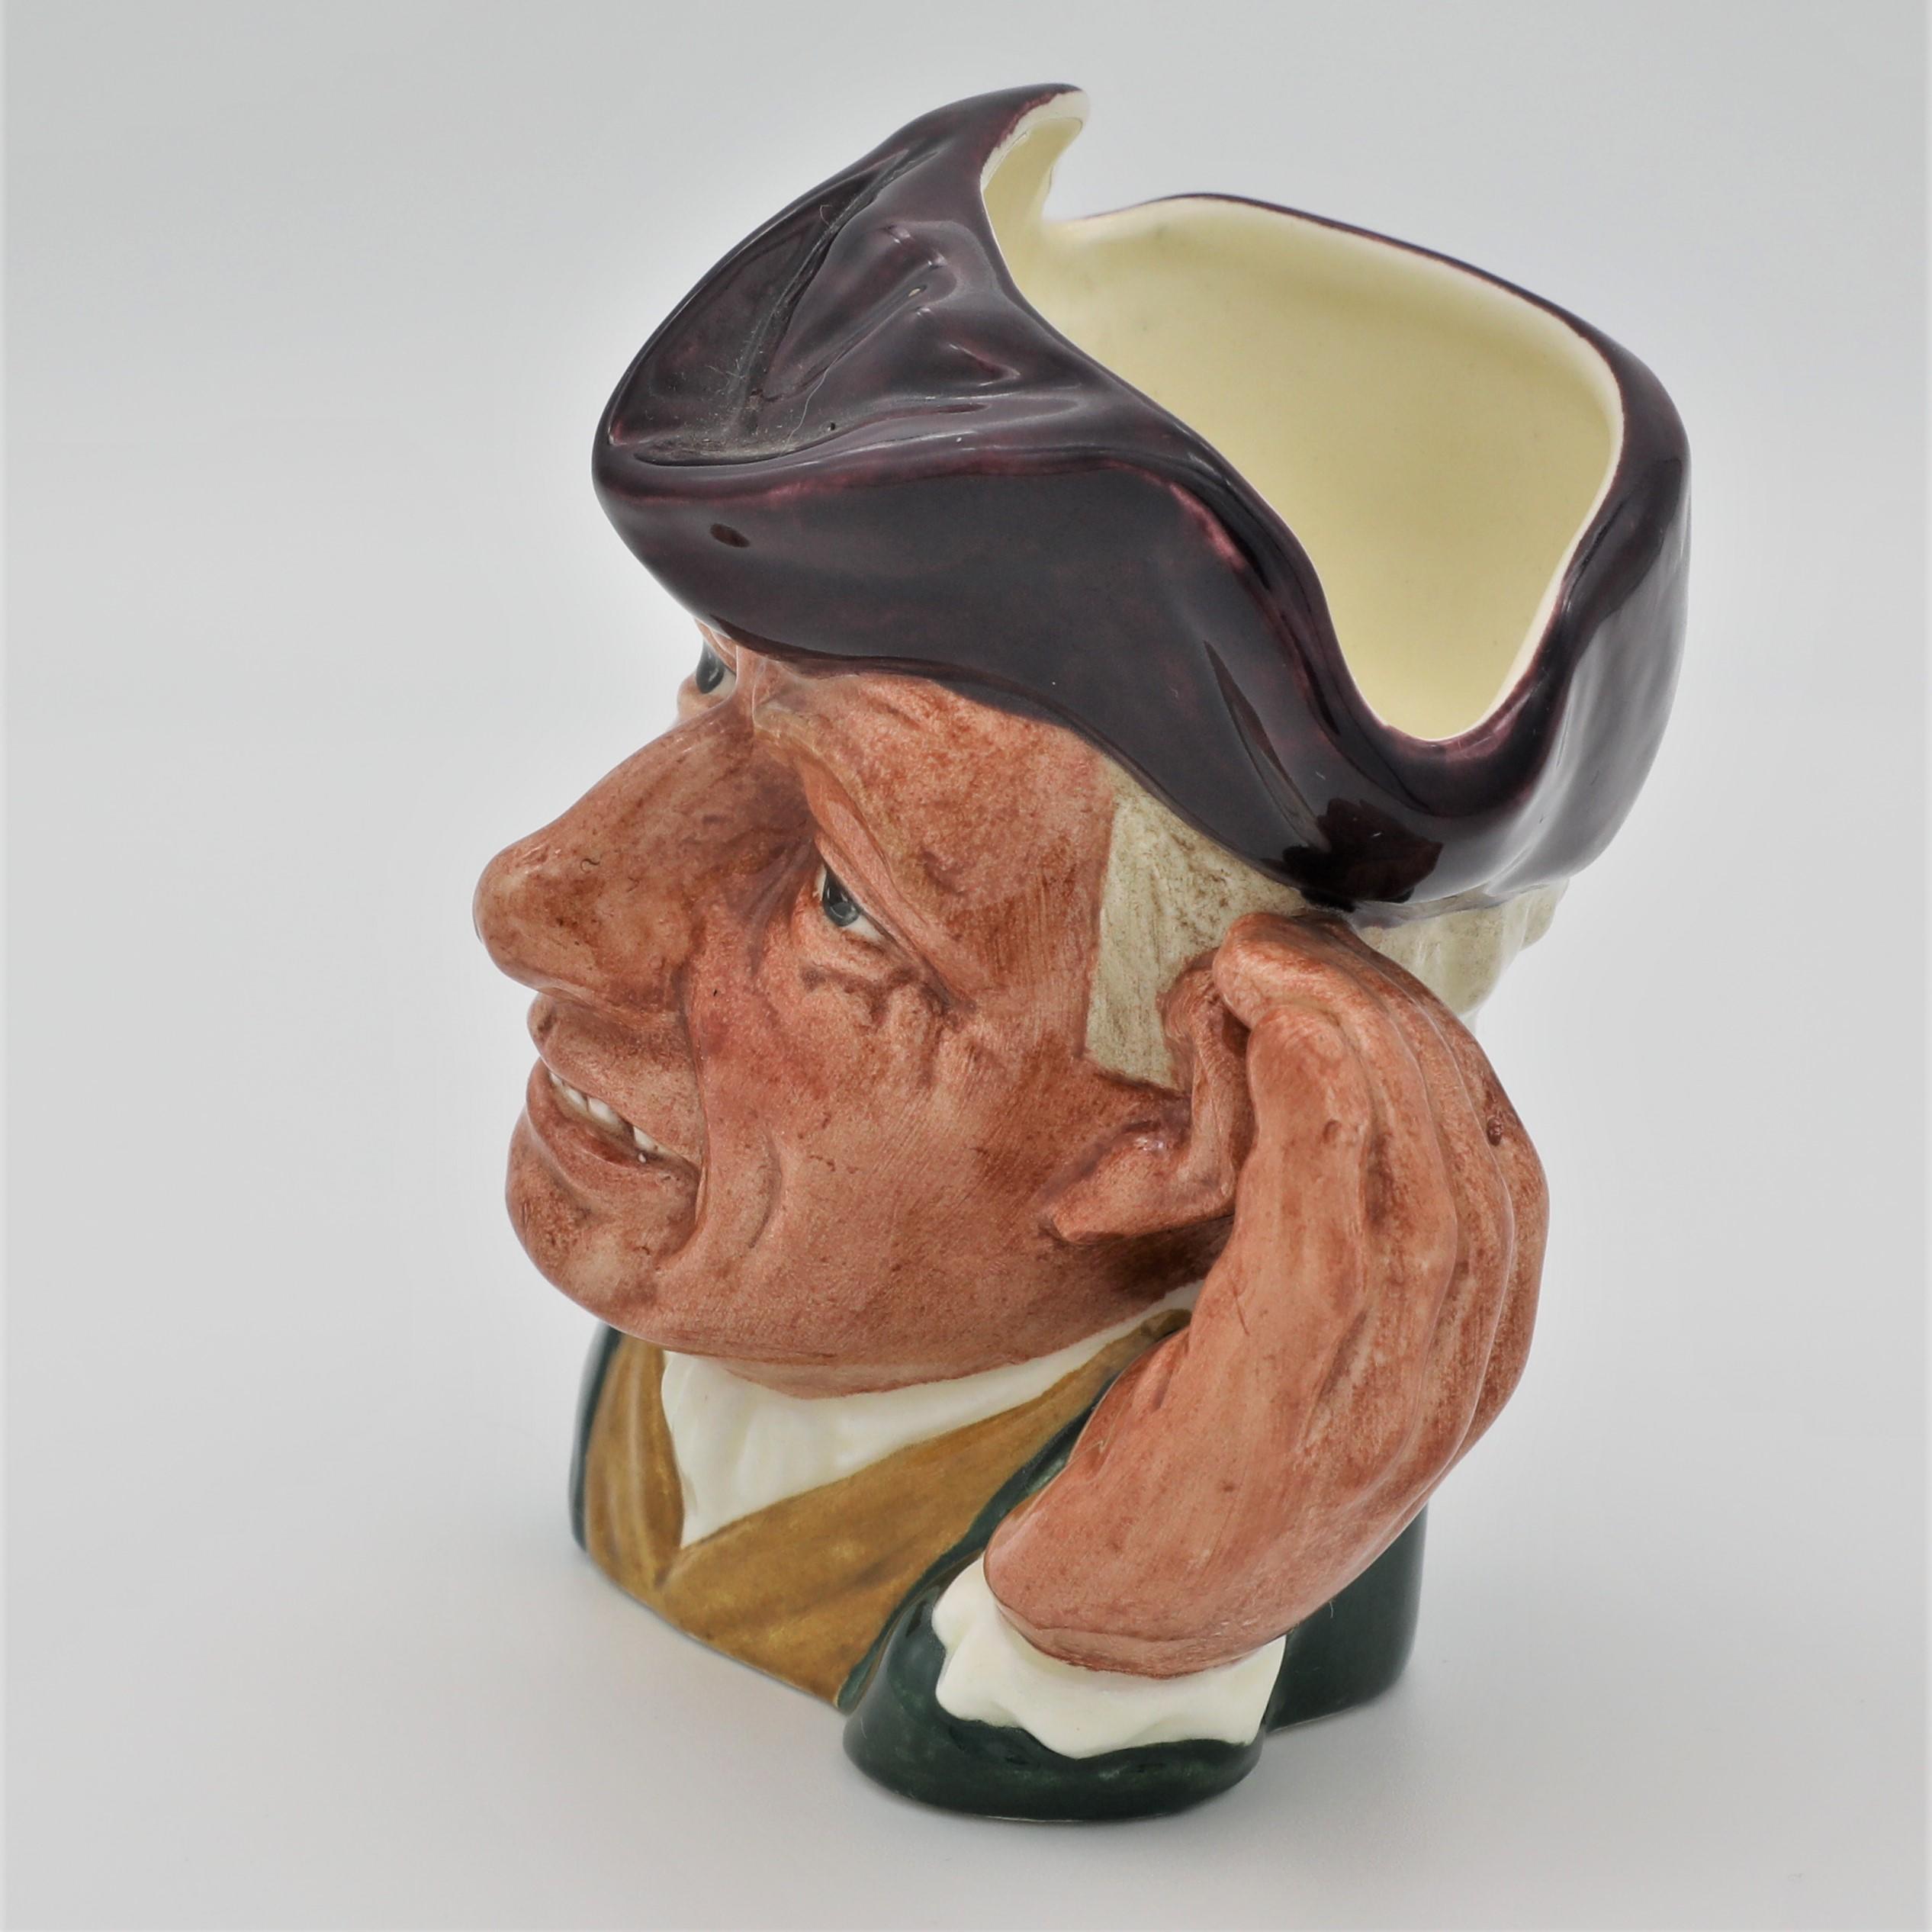 Royal Doulton D6591 'Ard Of 'Earing Small Character Jug - left side